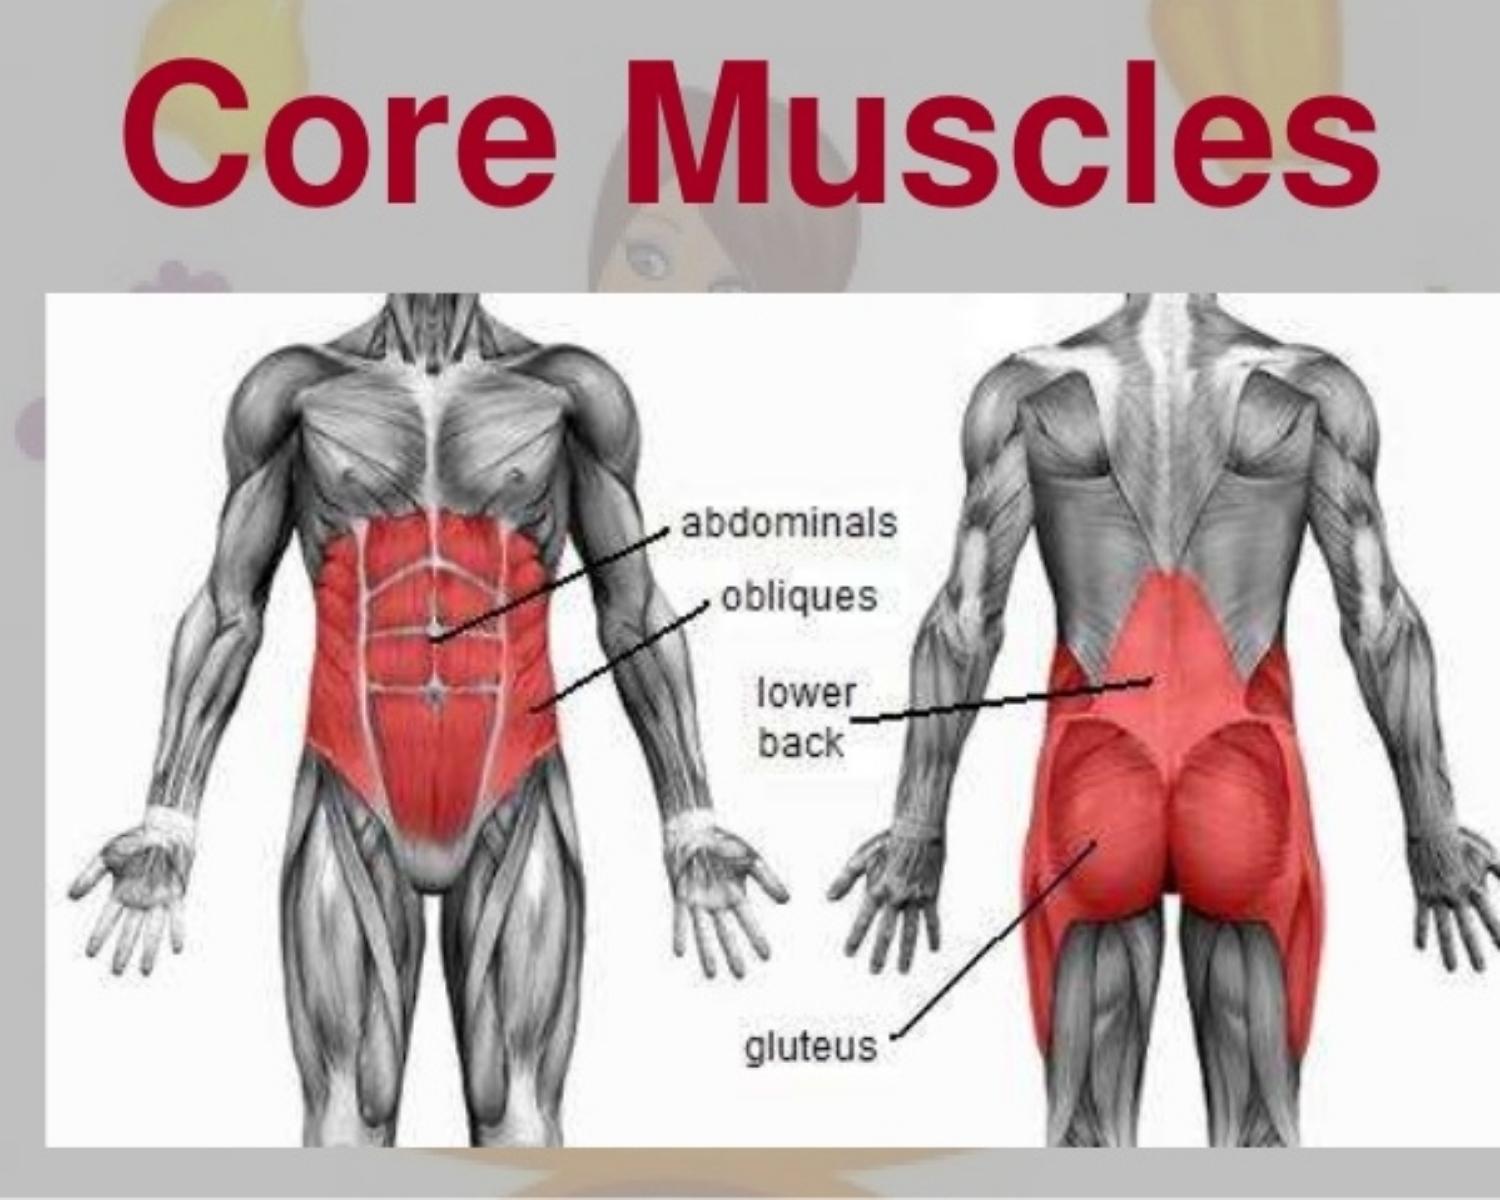 The Functions of Core Muscles